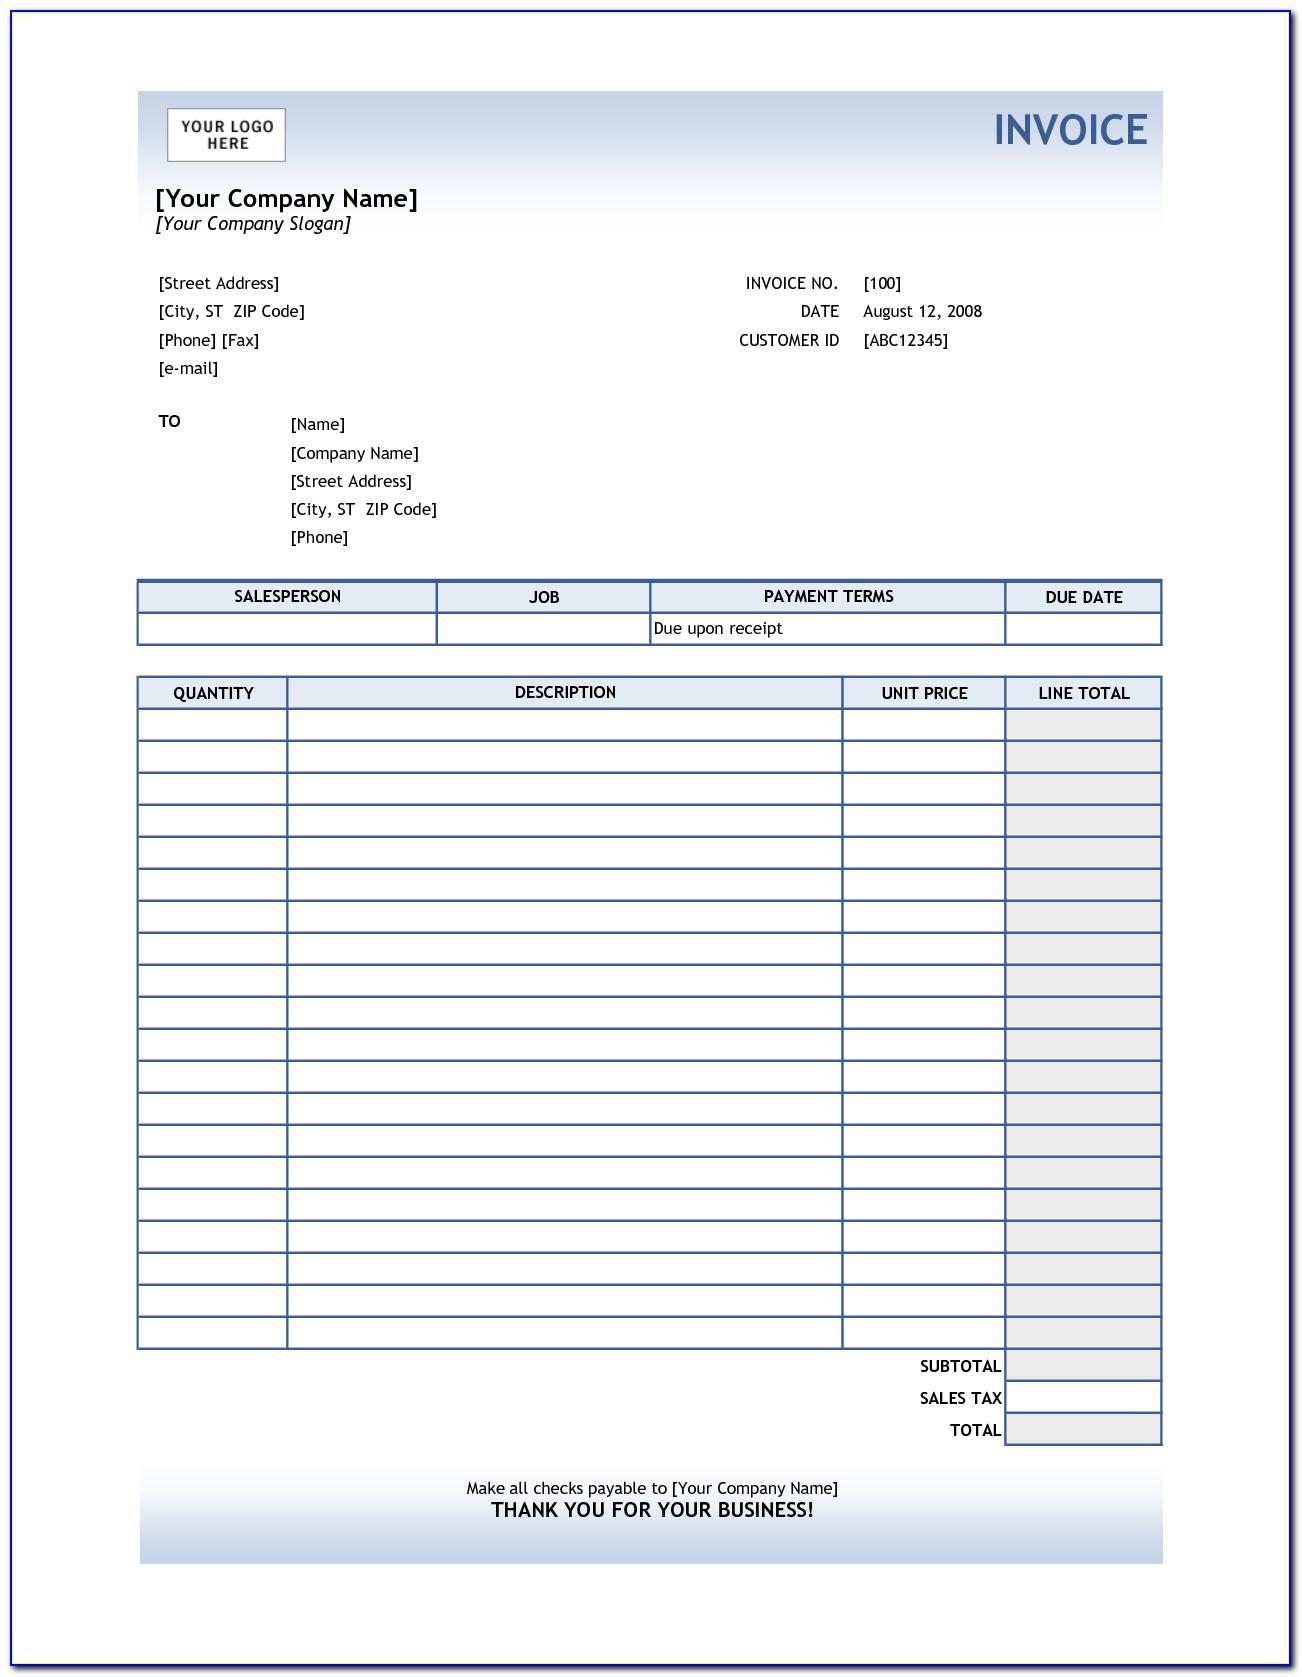 Sample Invoice Format Excel